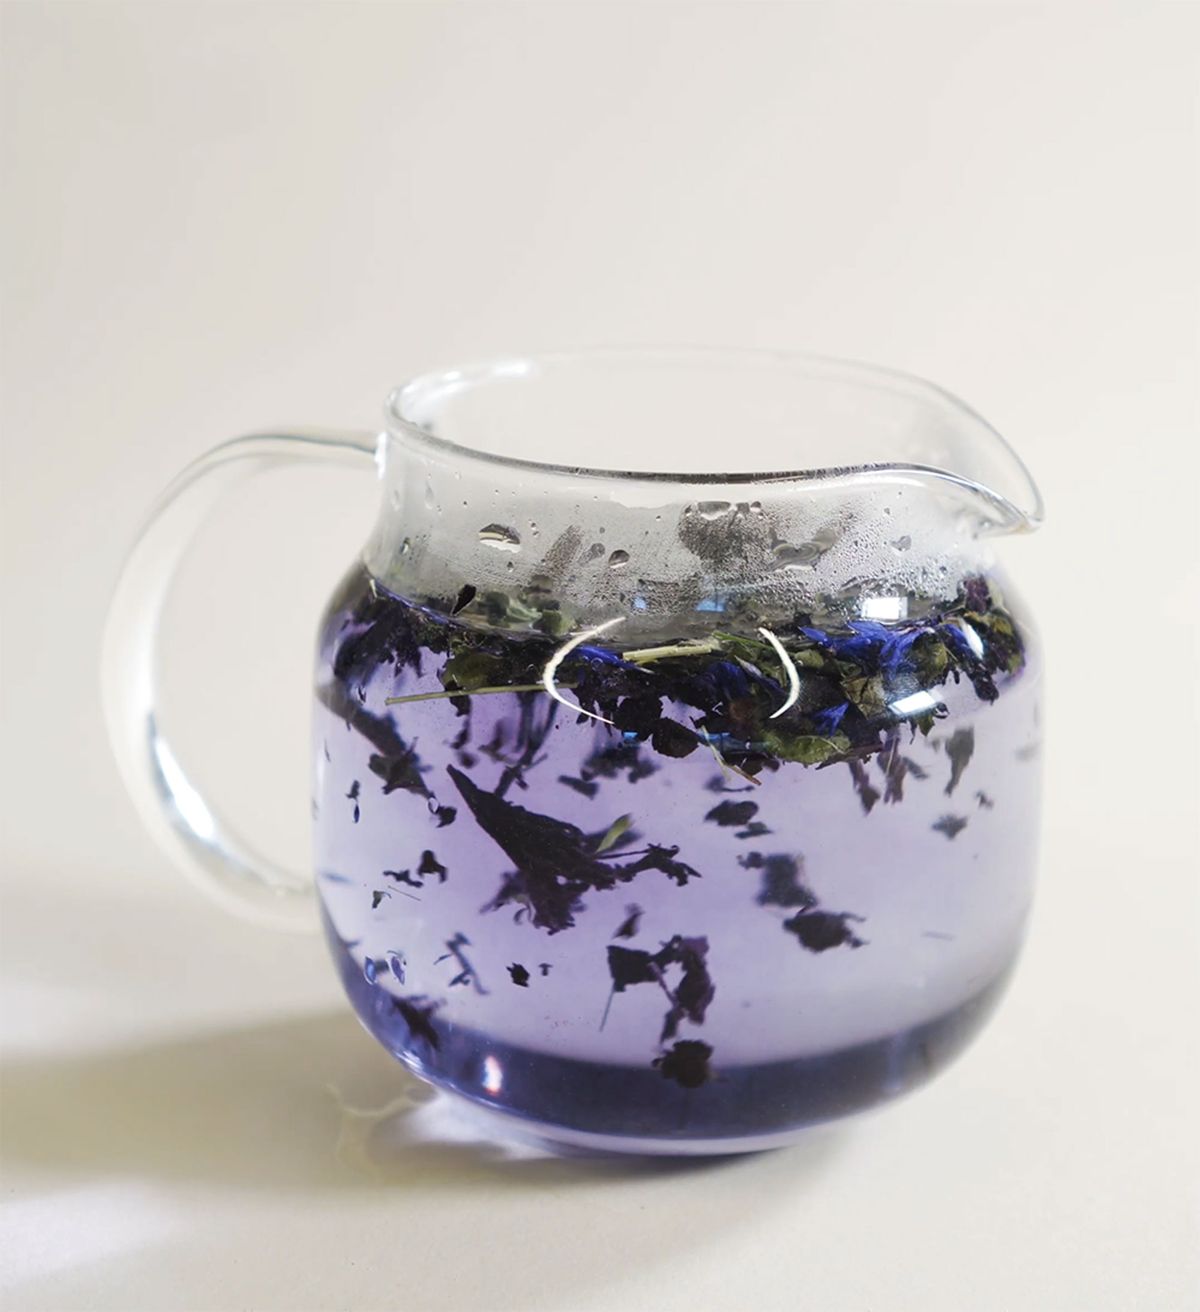 Glass teacup with spout holding light purple liquid and blue and green tea leaves inside.